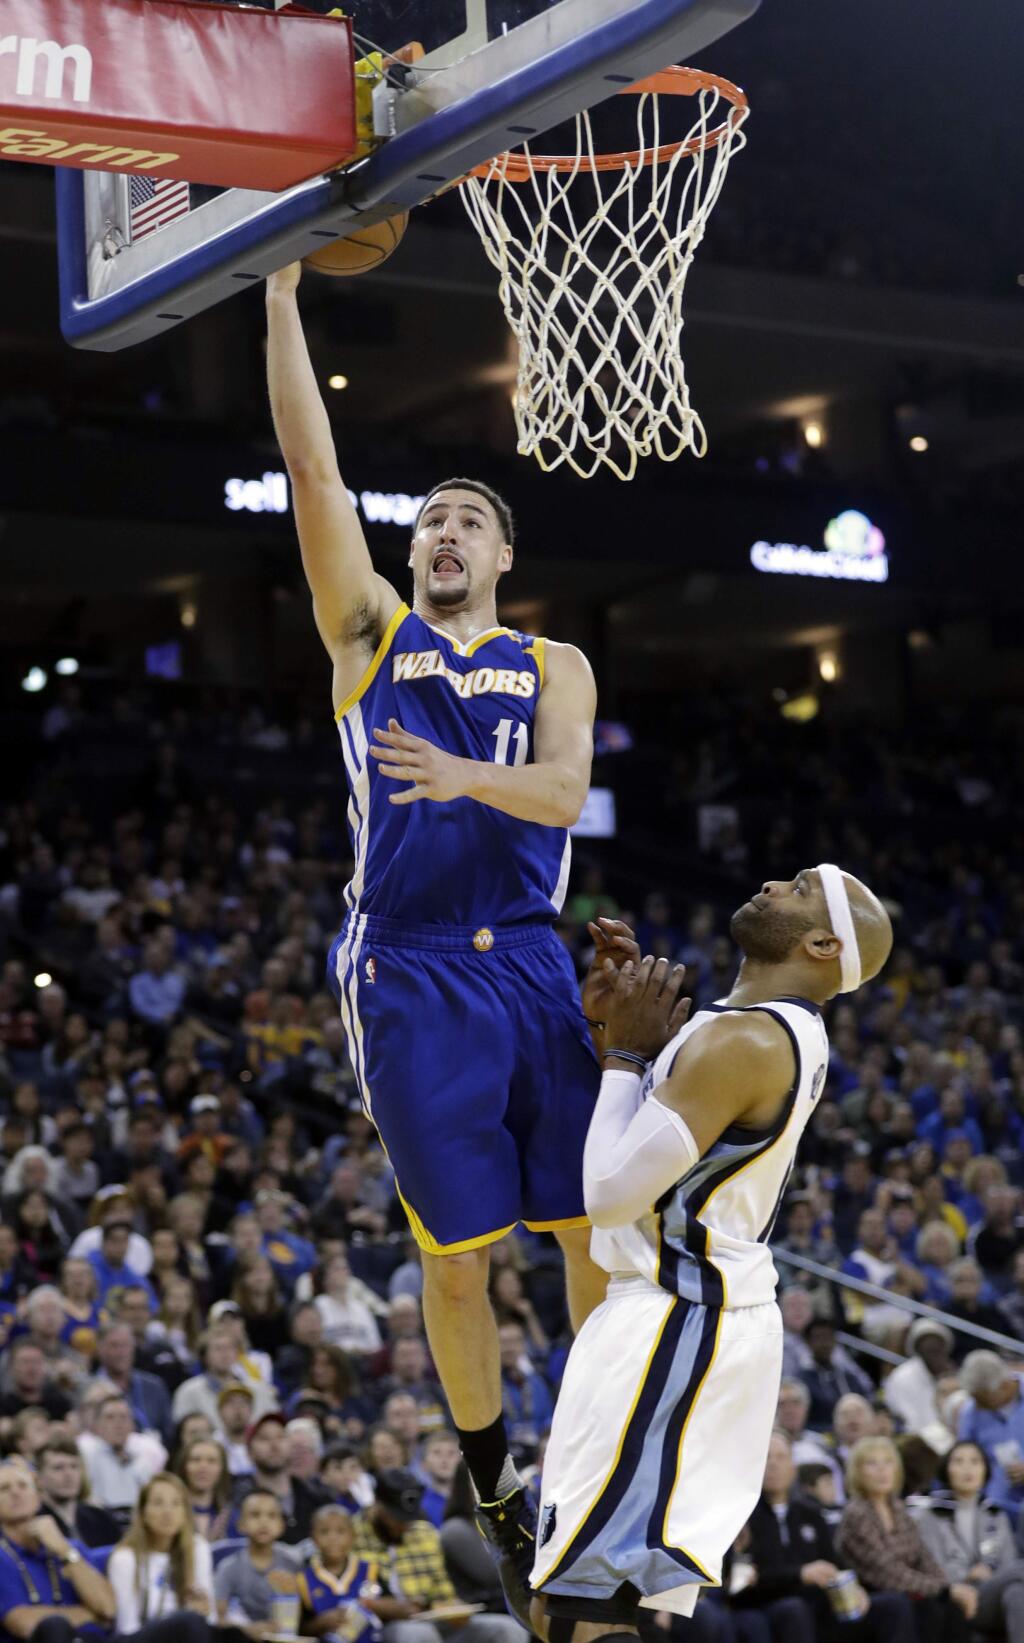 Golden State Warriors' Klay Thompson (11) scores past Memphis Grizzlies' Vince Carter during the second half of an NBA basketball game Sunday, March 26, 2017, in Oakland, Calif. (AP Photo/Marcio Jose Sanchez)